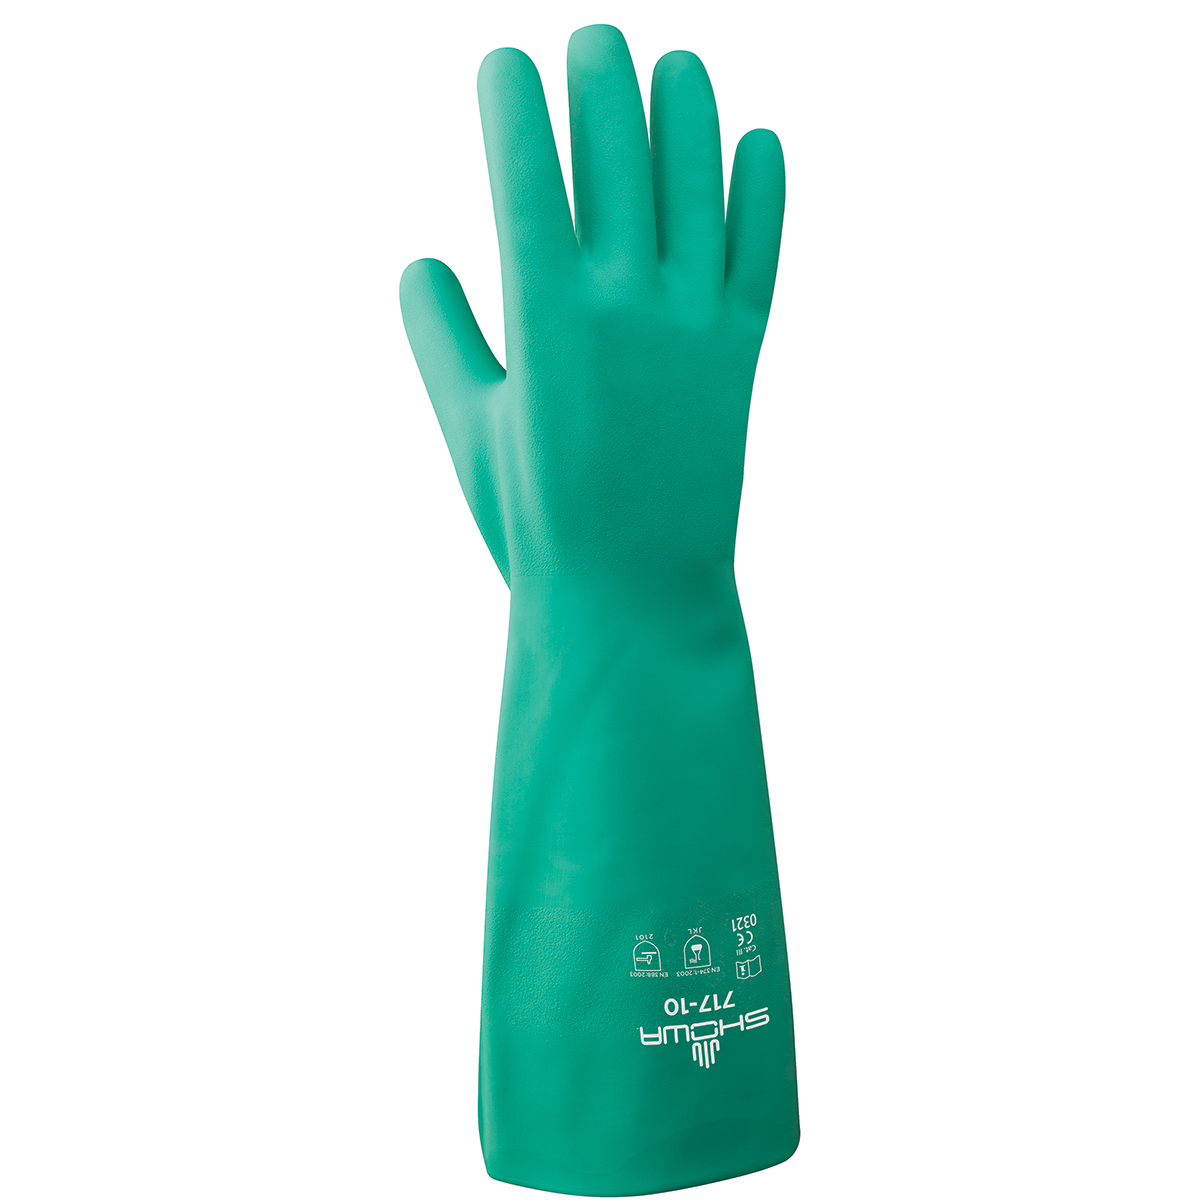 Chemical resistant unsupported nitrile, 13", 11-mil, light green, bisque finish, unlined, extra large